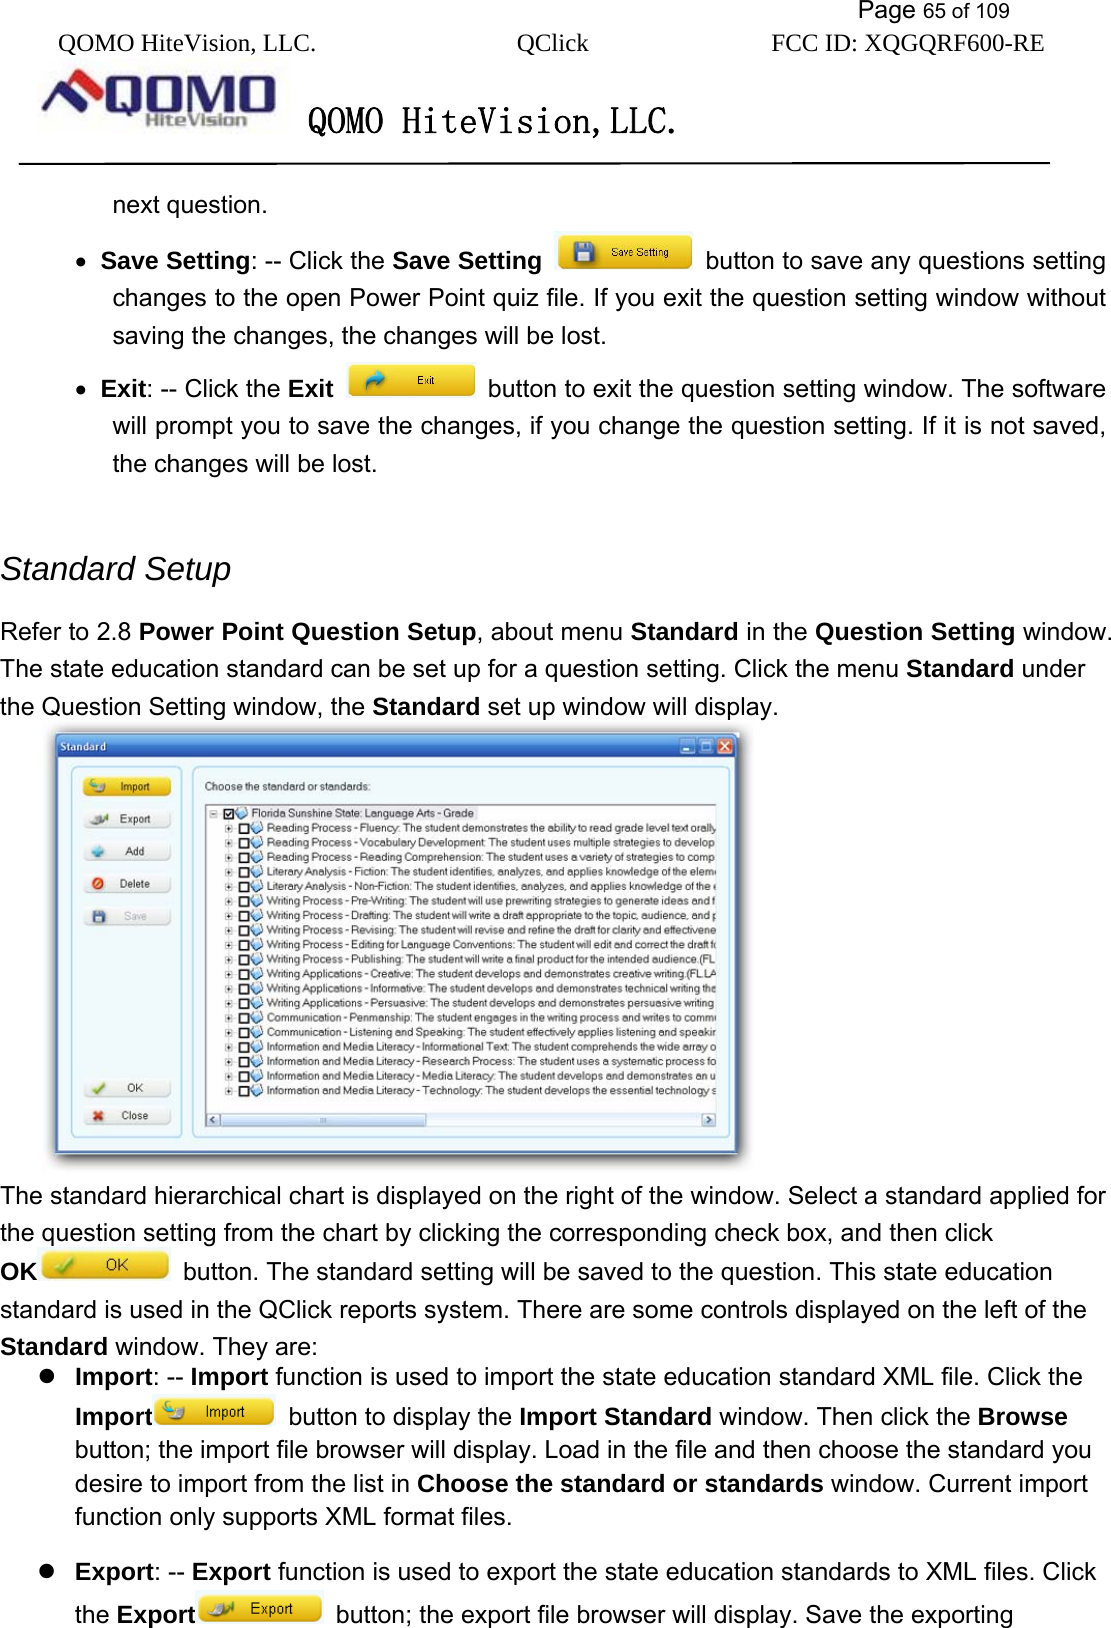           Page 65 of 109 QOMO HiteVision, LLC.  QClick        FCC ID: XQGQRF600-RE     QOMO HiteVision,LLC.   next question. •  Save Setting: -- Click the Save Setting   button to save any questions setting changes to the open Power Point quiz file. If you exit the question setting window without saving the changes, the changes will be lost. •  Exit: -- Click the Exit   button to exit the question setting window. The software will prompt you to save the changes, if you change the question setting. If it is not saved, the changes will be lost.  Standard Setup Refer to 2.8 Power Point Question Setup, about menu Standard in the Question Setting window. The state education standard can be set up for a question setting. Click the menu Standard under the Question Setting window, the Standard set up window will display.  The standard hierarchical chart is displayed on the right of the window. Select a standard applied for the question setting from the chart by clicking the corresponding check box, and then click OK   button. The standard setting will be saved to the question. This state education standard is used in the QClick reports system. There are some controls displayed on the left of the Standard window. They are:  Import: -- Import function is used to import the state education standard XML file. Click the Import   button to display the Import Standard window. Then click the Browse button; the import file browser will display. Load in the file and then choose the standard you desire to import from the list in Choose the standard or standards window. Current import function only supports XML format files.  Export: -- Export function is used to export the state education standards to XML files. Click the Export   button; the export file browser will display. Save the exporting 